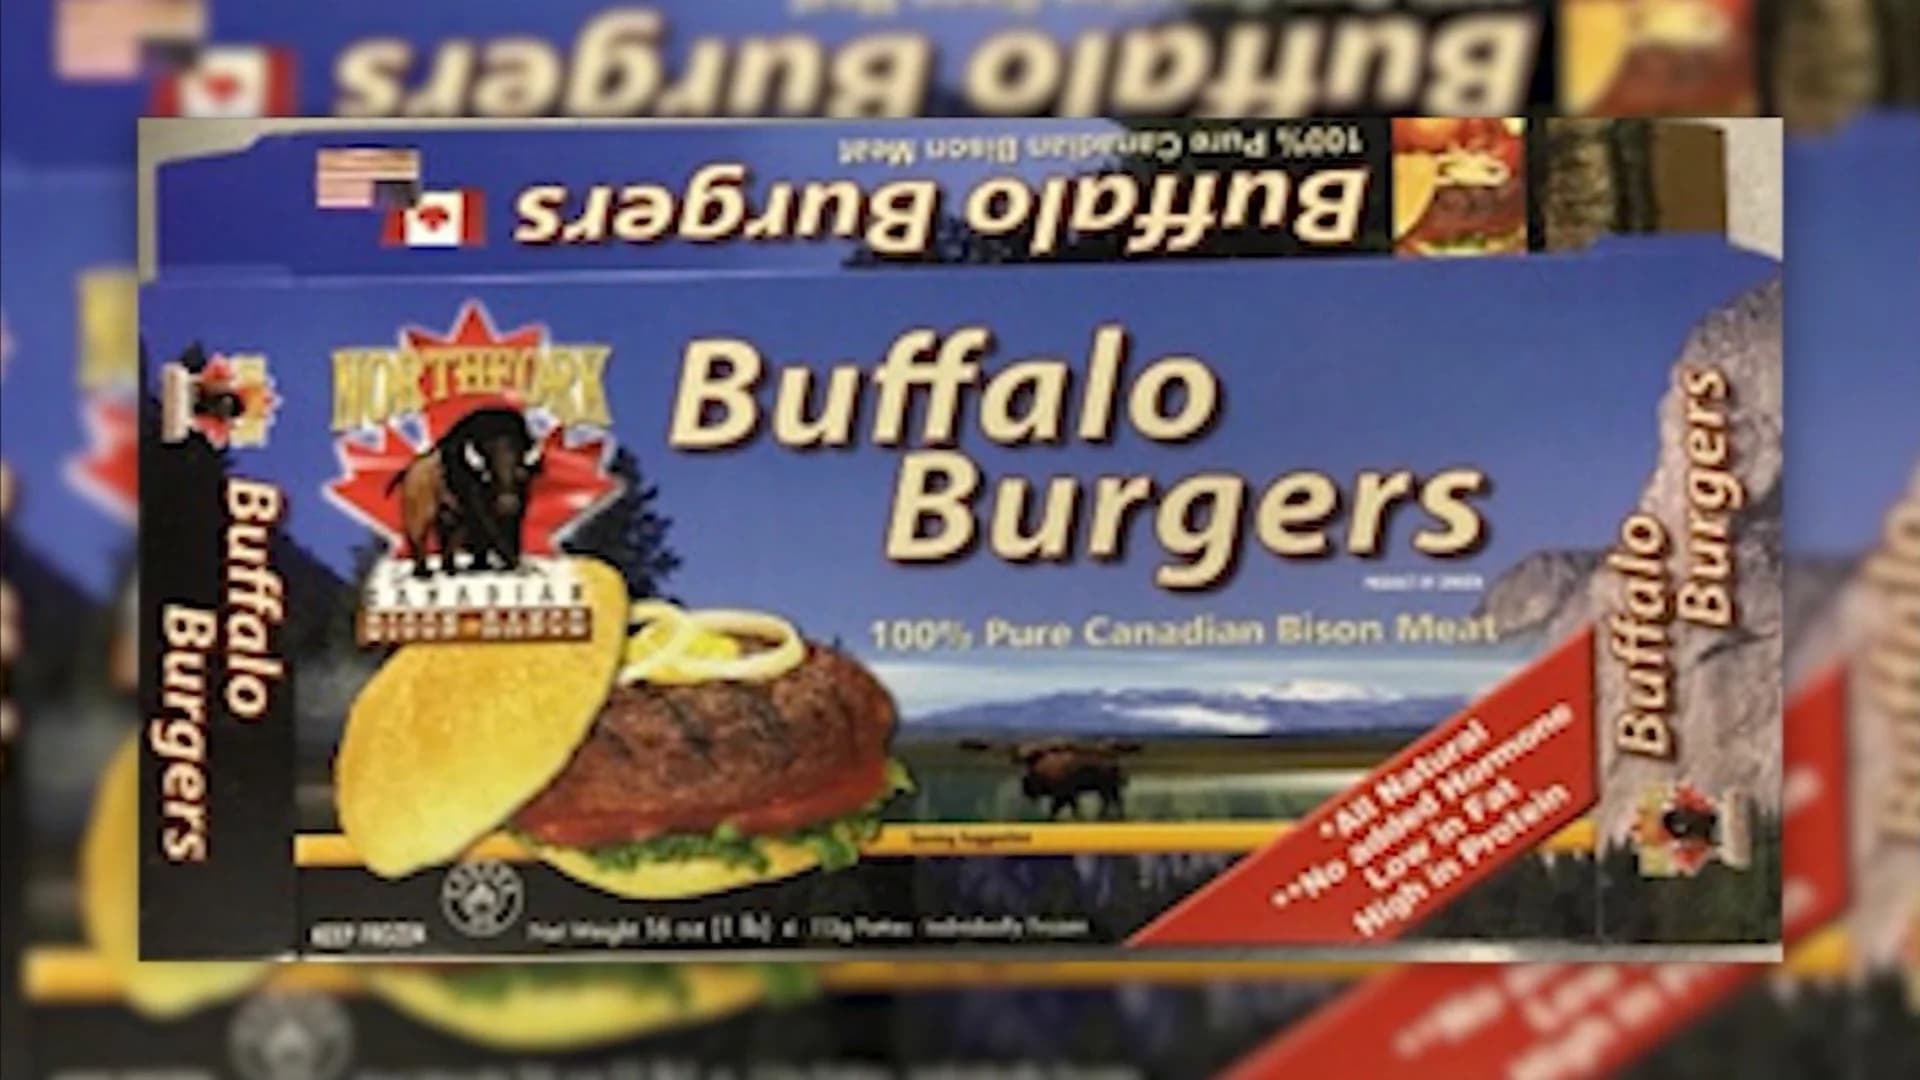 Company recalls ground bison after over a dozen reported sicknesses